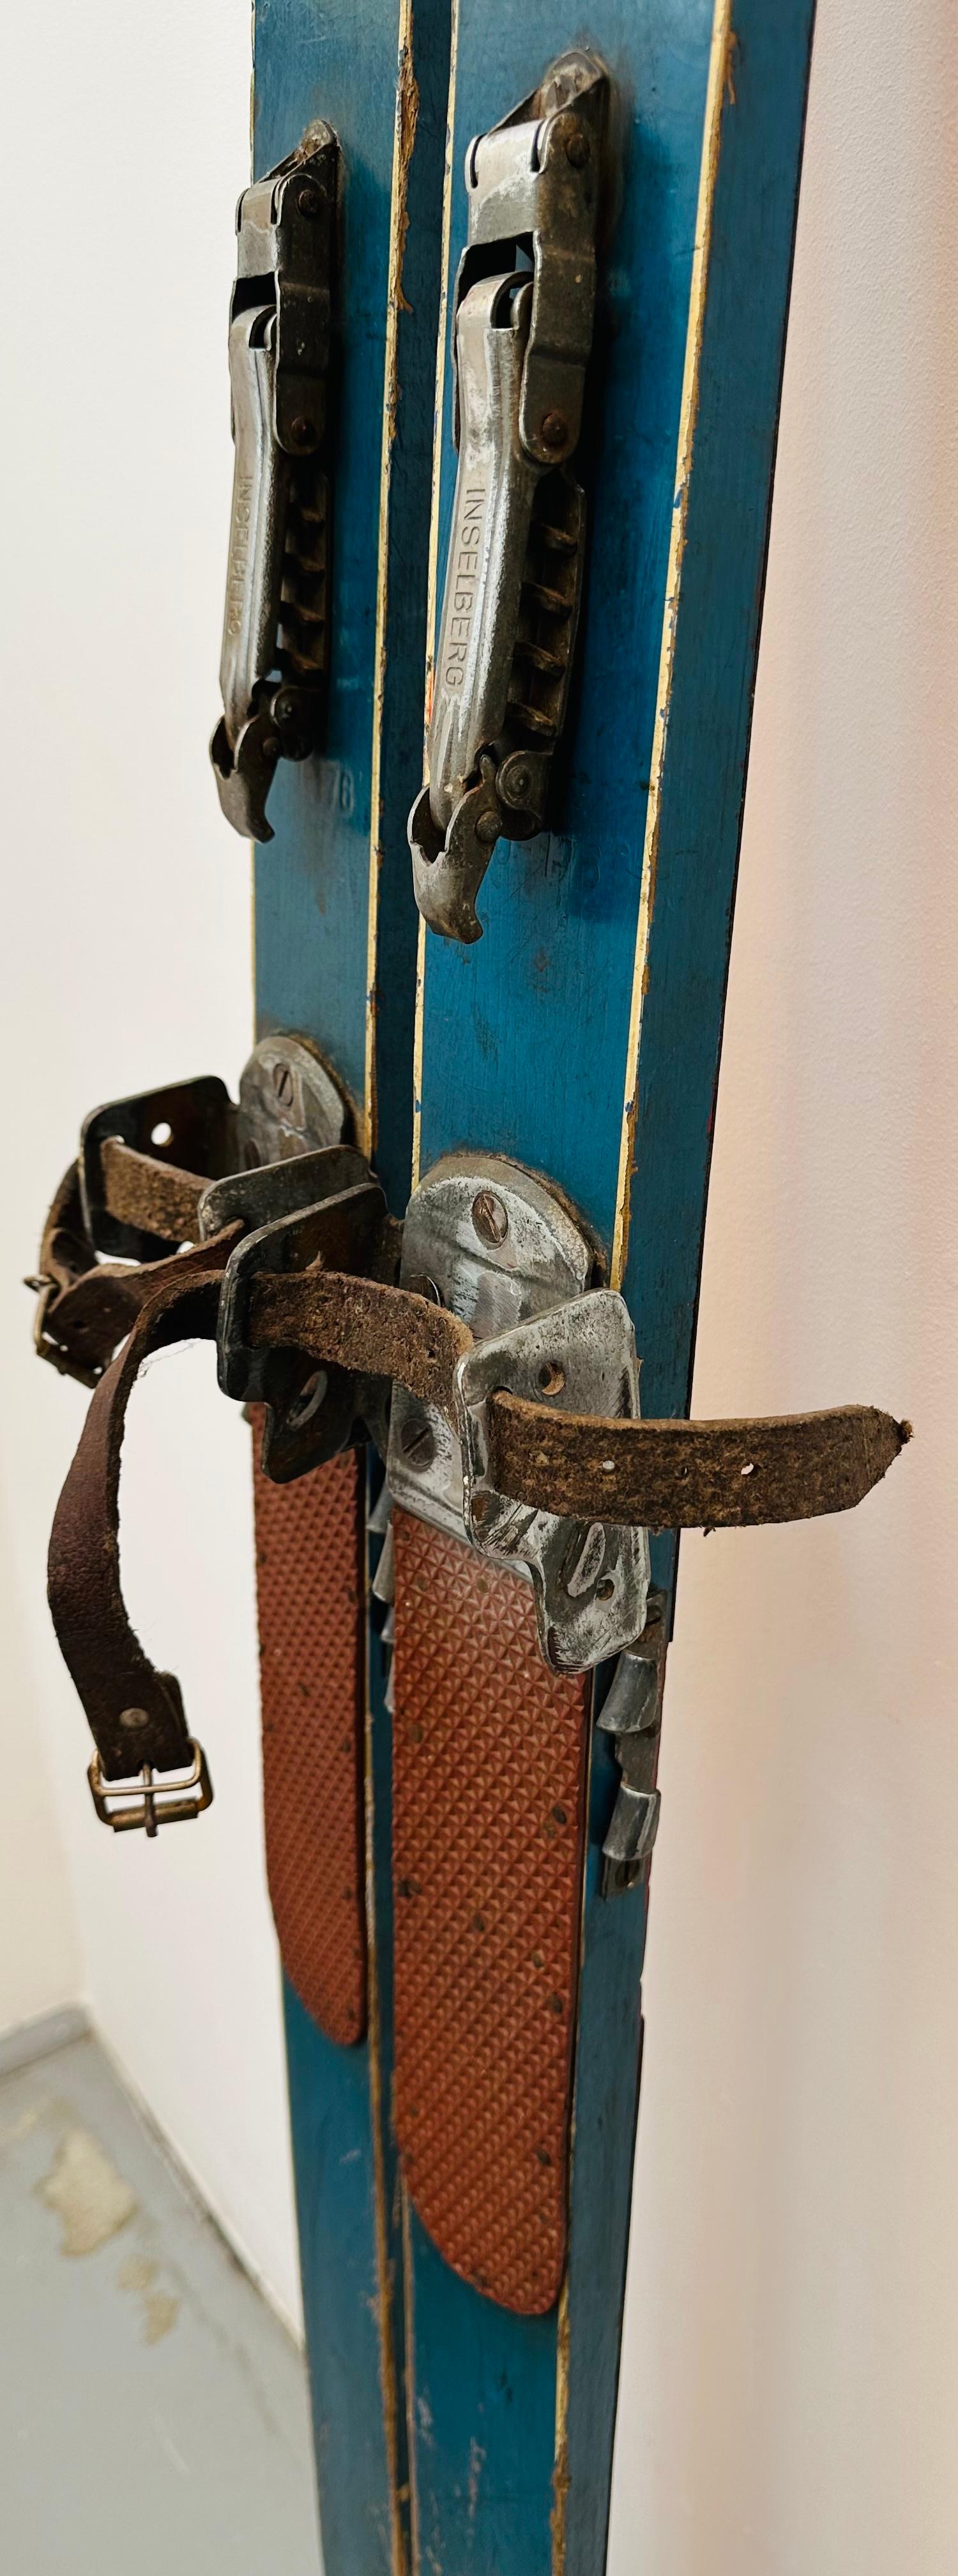 Vintage Circa 1950s Wooden Skis with Bindings by Spezial Schichten Hohnberg In Fair Condition For Sale In London, GB